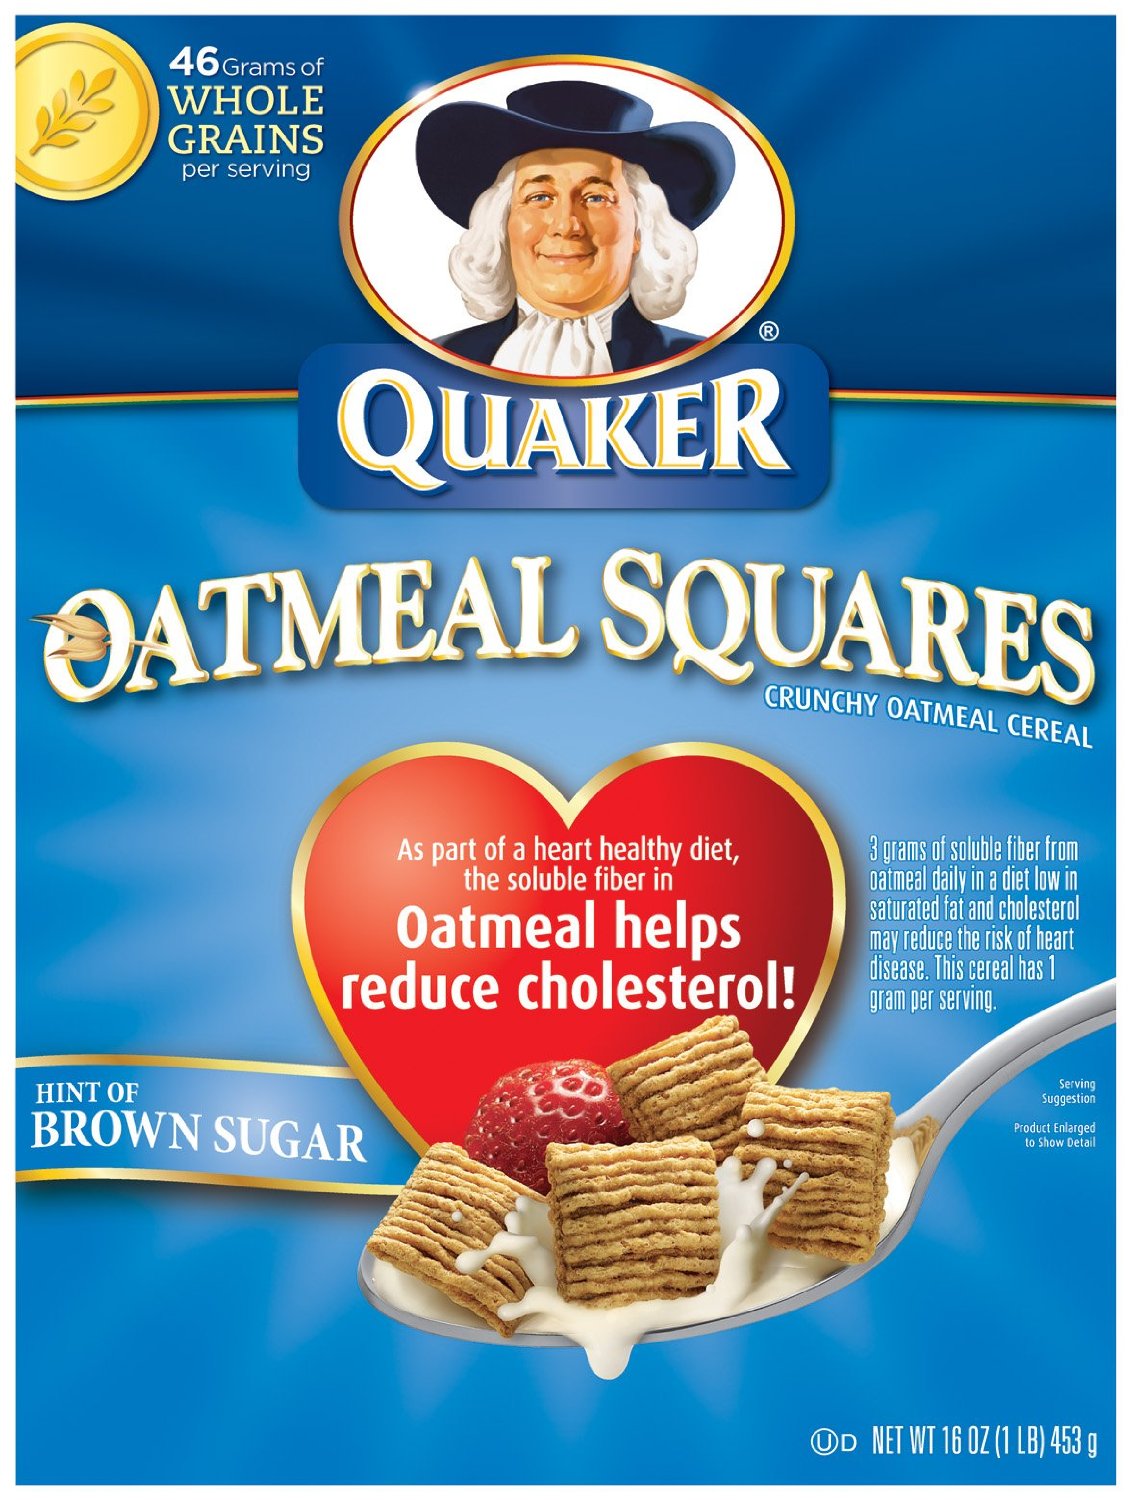 quaker oatmeal squares cereal